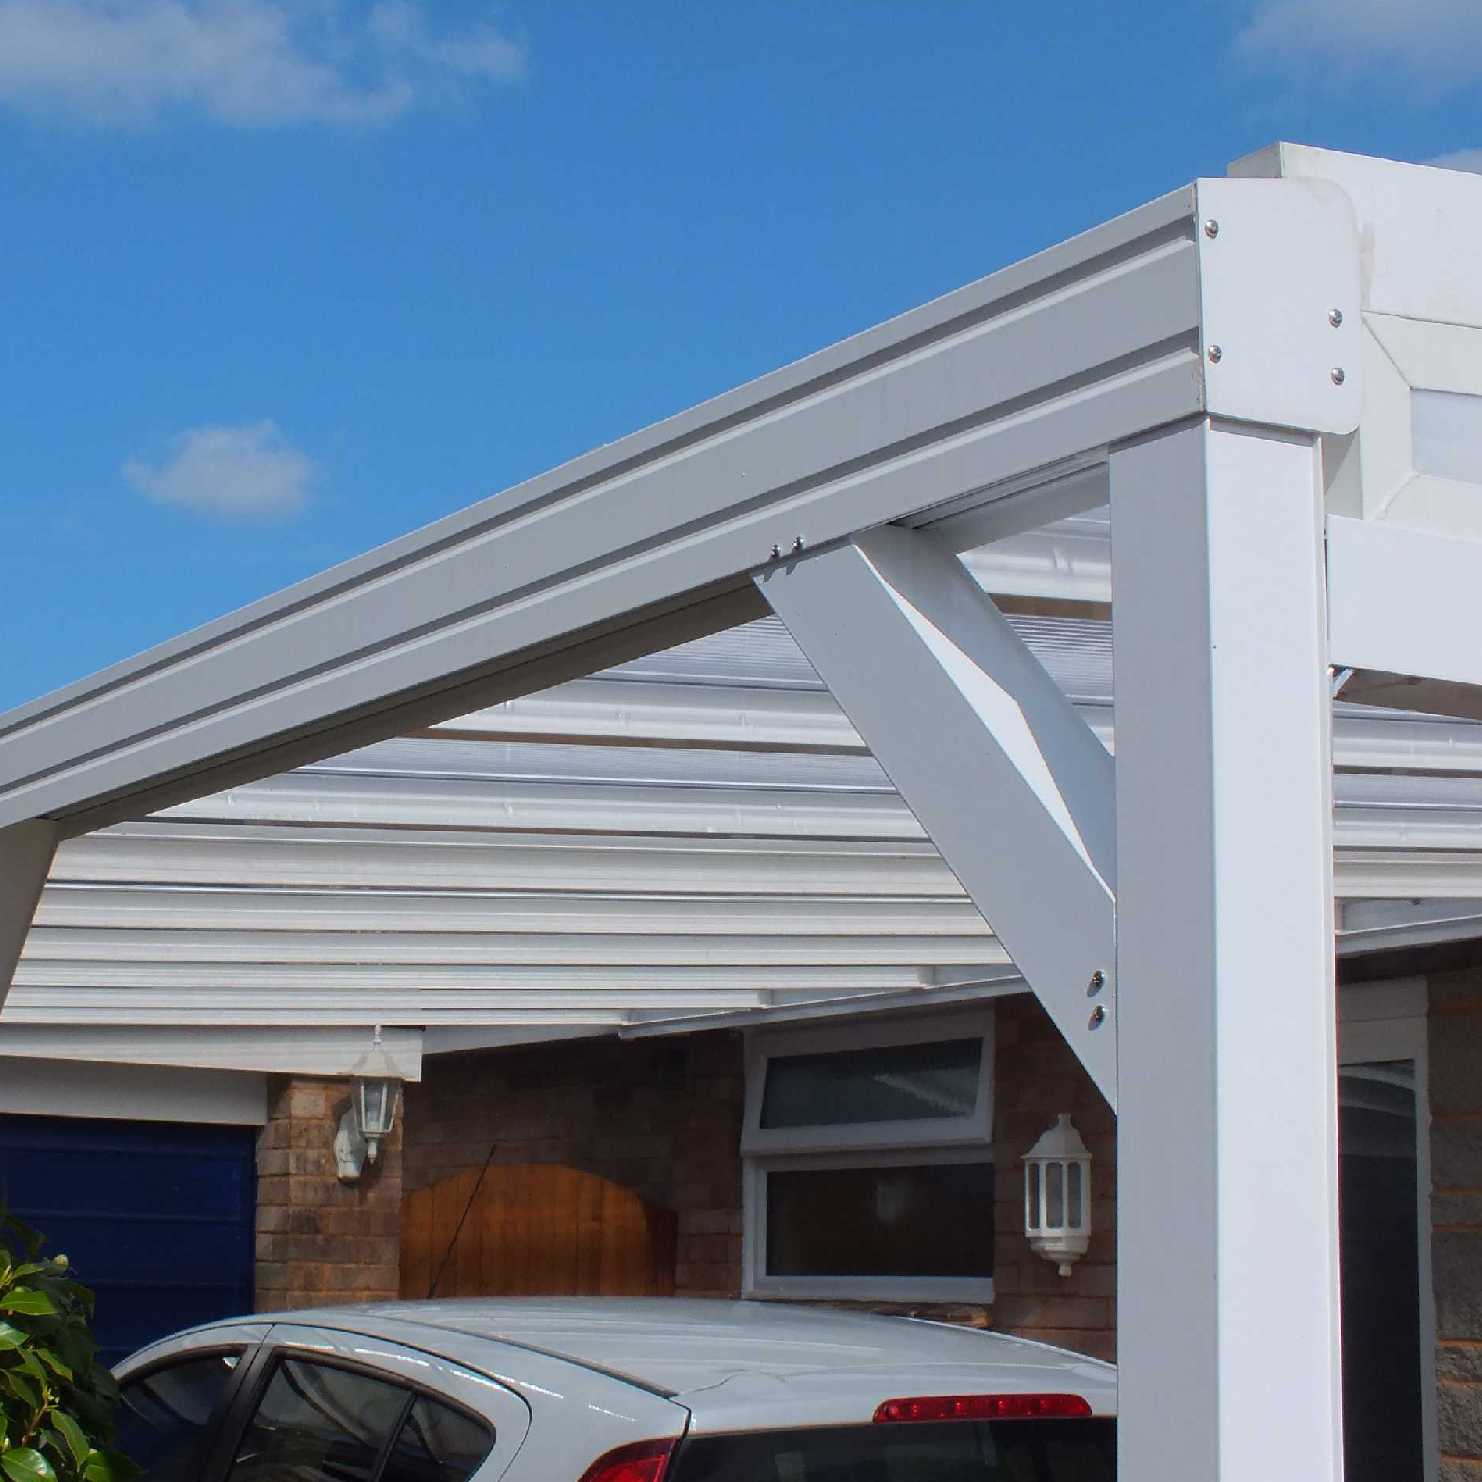 Great deals on Omega Smart Lean-To Canopy, White with 16mm Polycarbonate Glazing - 9.5m (W) x 3.0m (P), (5) Supporting Posts